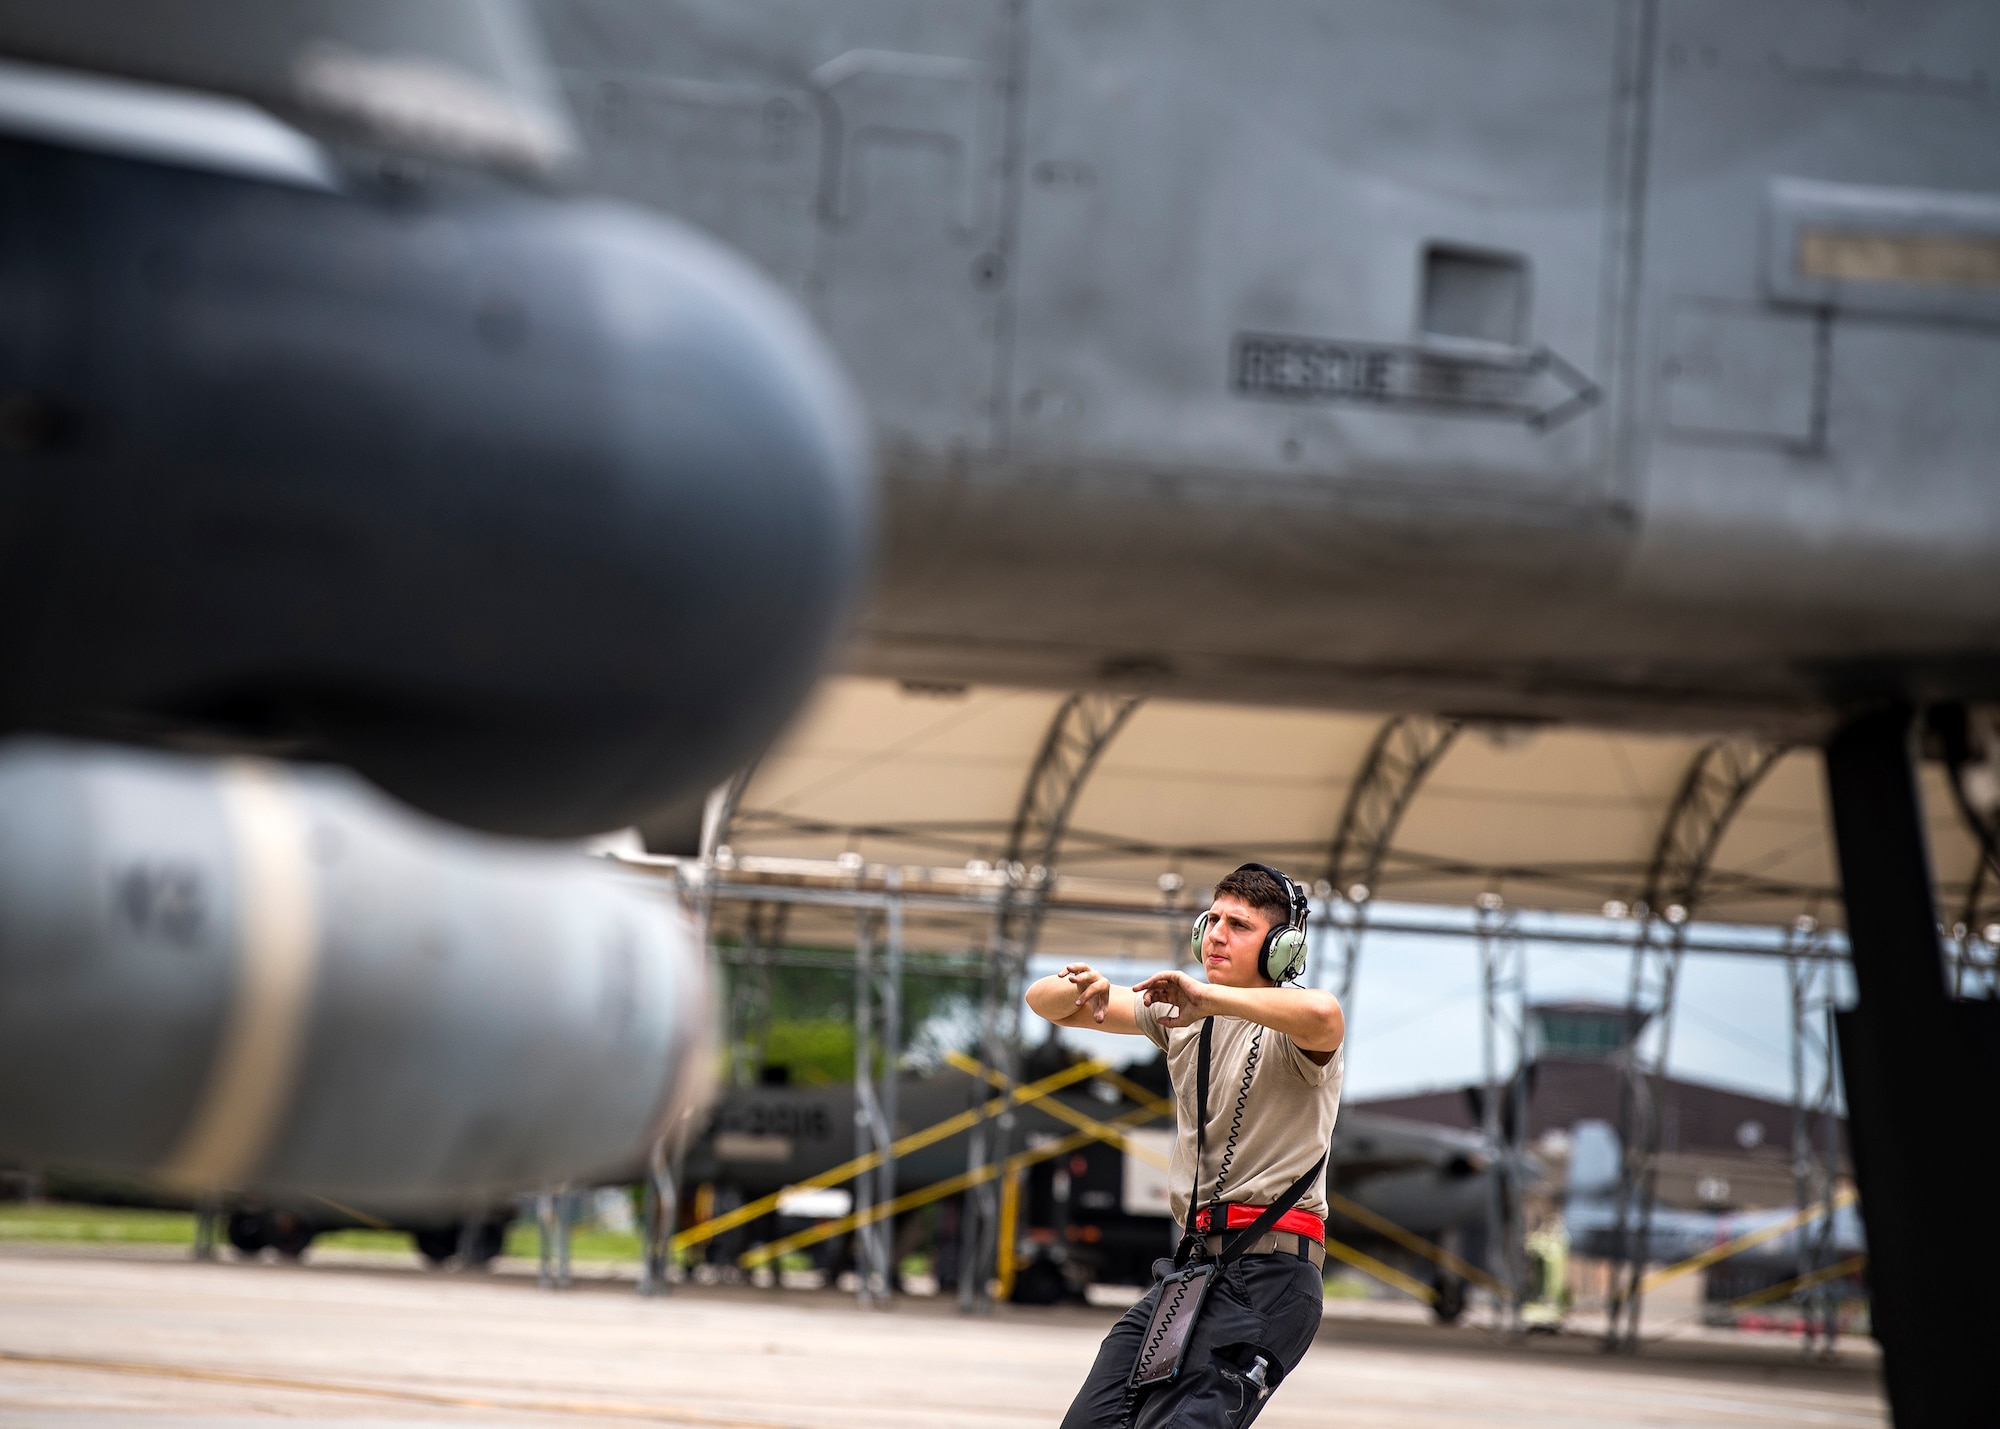 Senior Airman Mitch Yuncker, 75th Aircraft Maintenance Unit crew chief, marshals an A-10C Thunderbolt II onto the taxiway during a sortie surge exercise, July 24, 2019, at Moody Air Force Base, Ga. The exercise was conducted to determine Airmen's abilities to perform effectively while generating combat or training sorties at an accelerated rate. Throughout the four-day surge, pilots and maintainers completed 131 sorties spanning approximately 152 flying hours. (U.S. Air Force photo by Airman 1st Class Eugene Oliver)